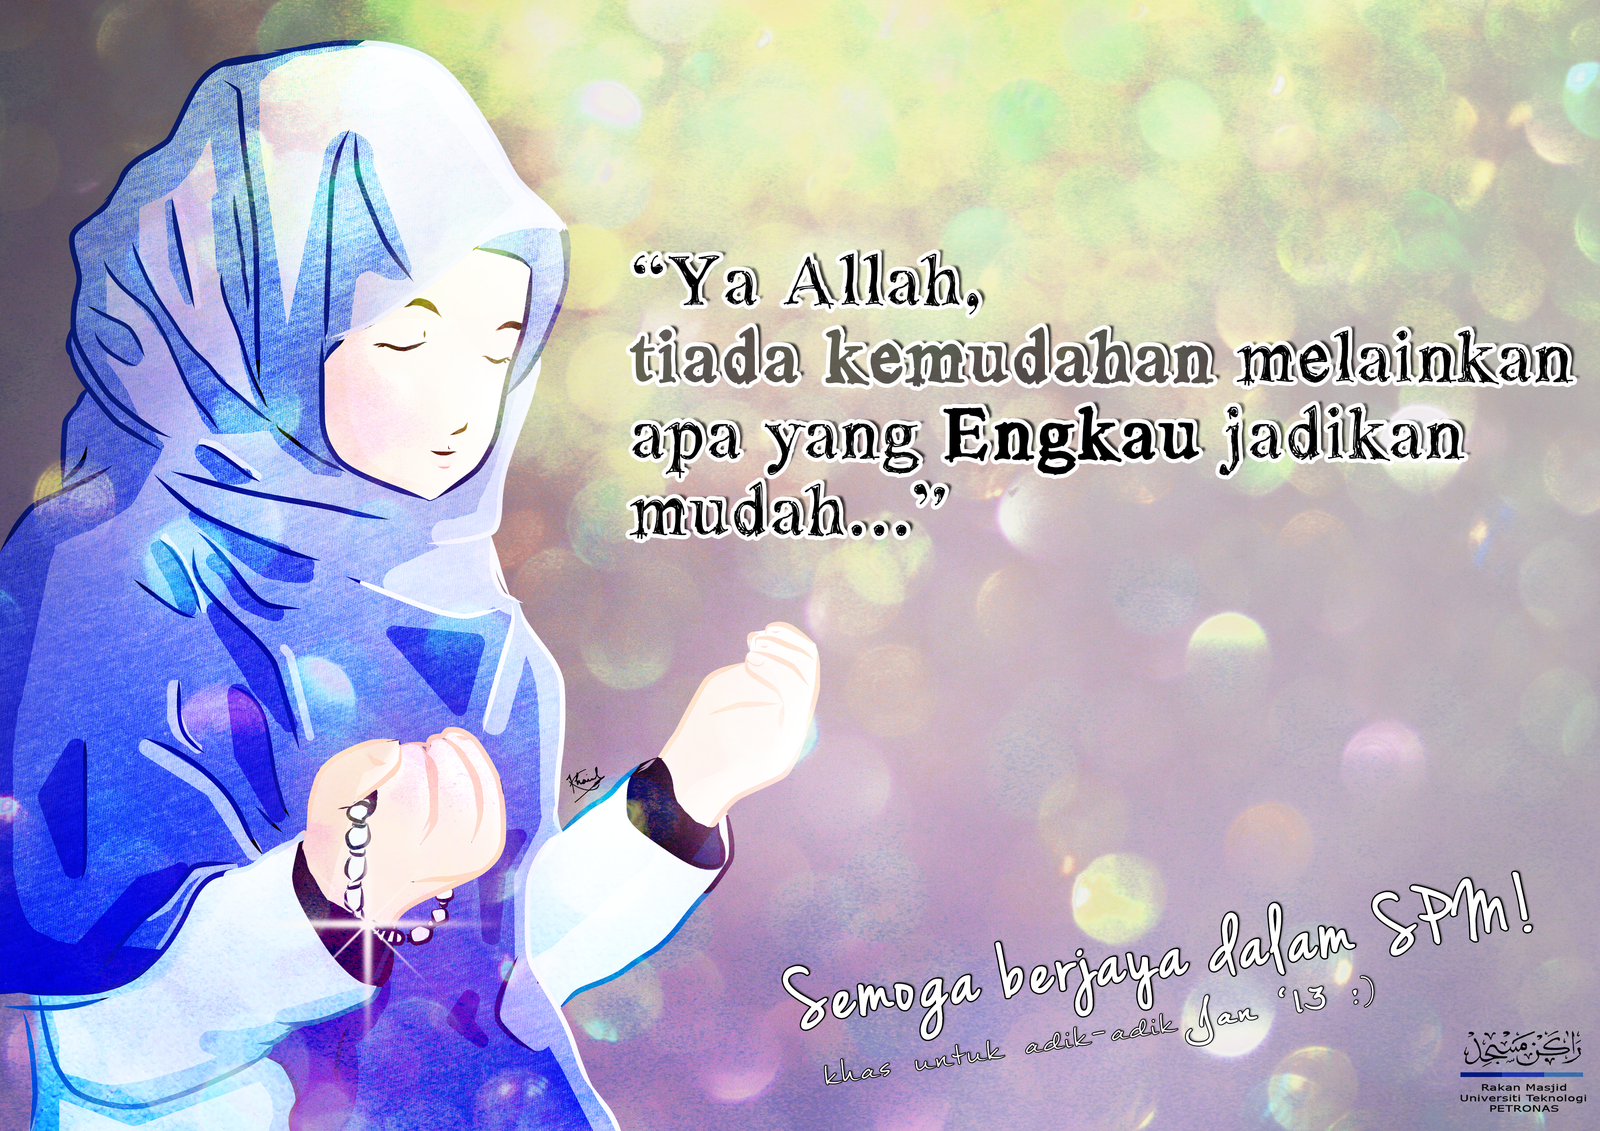 Muslimah making Doa for SPM results by SirImran on DeviantArt